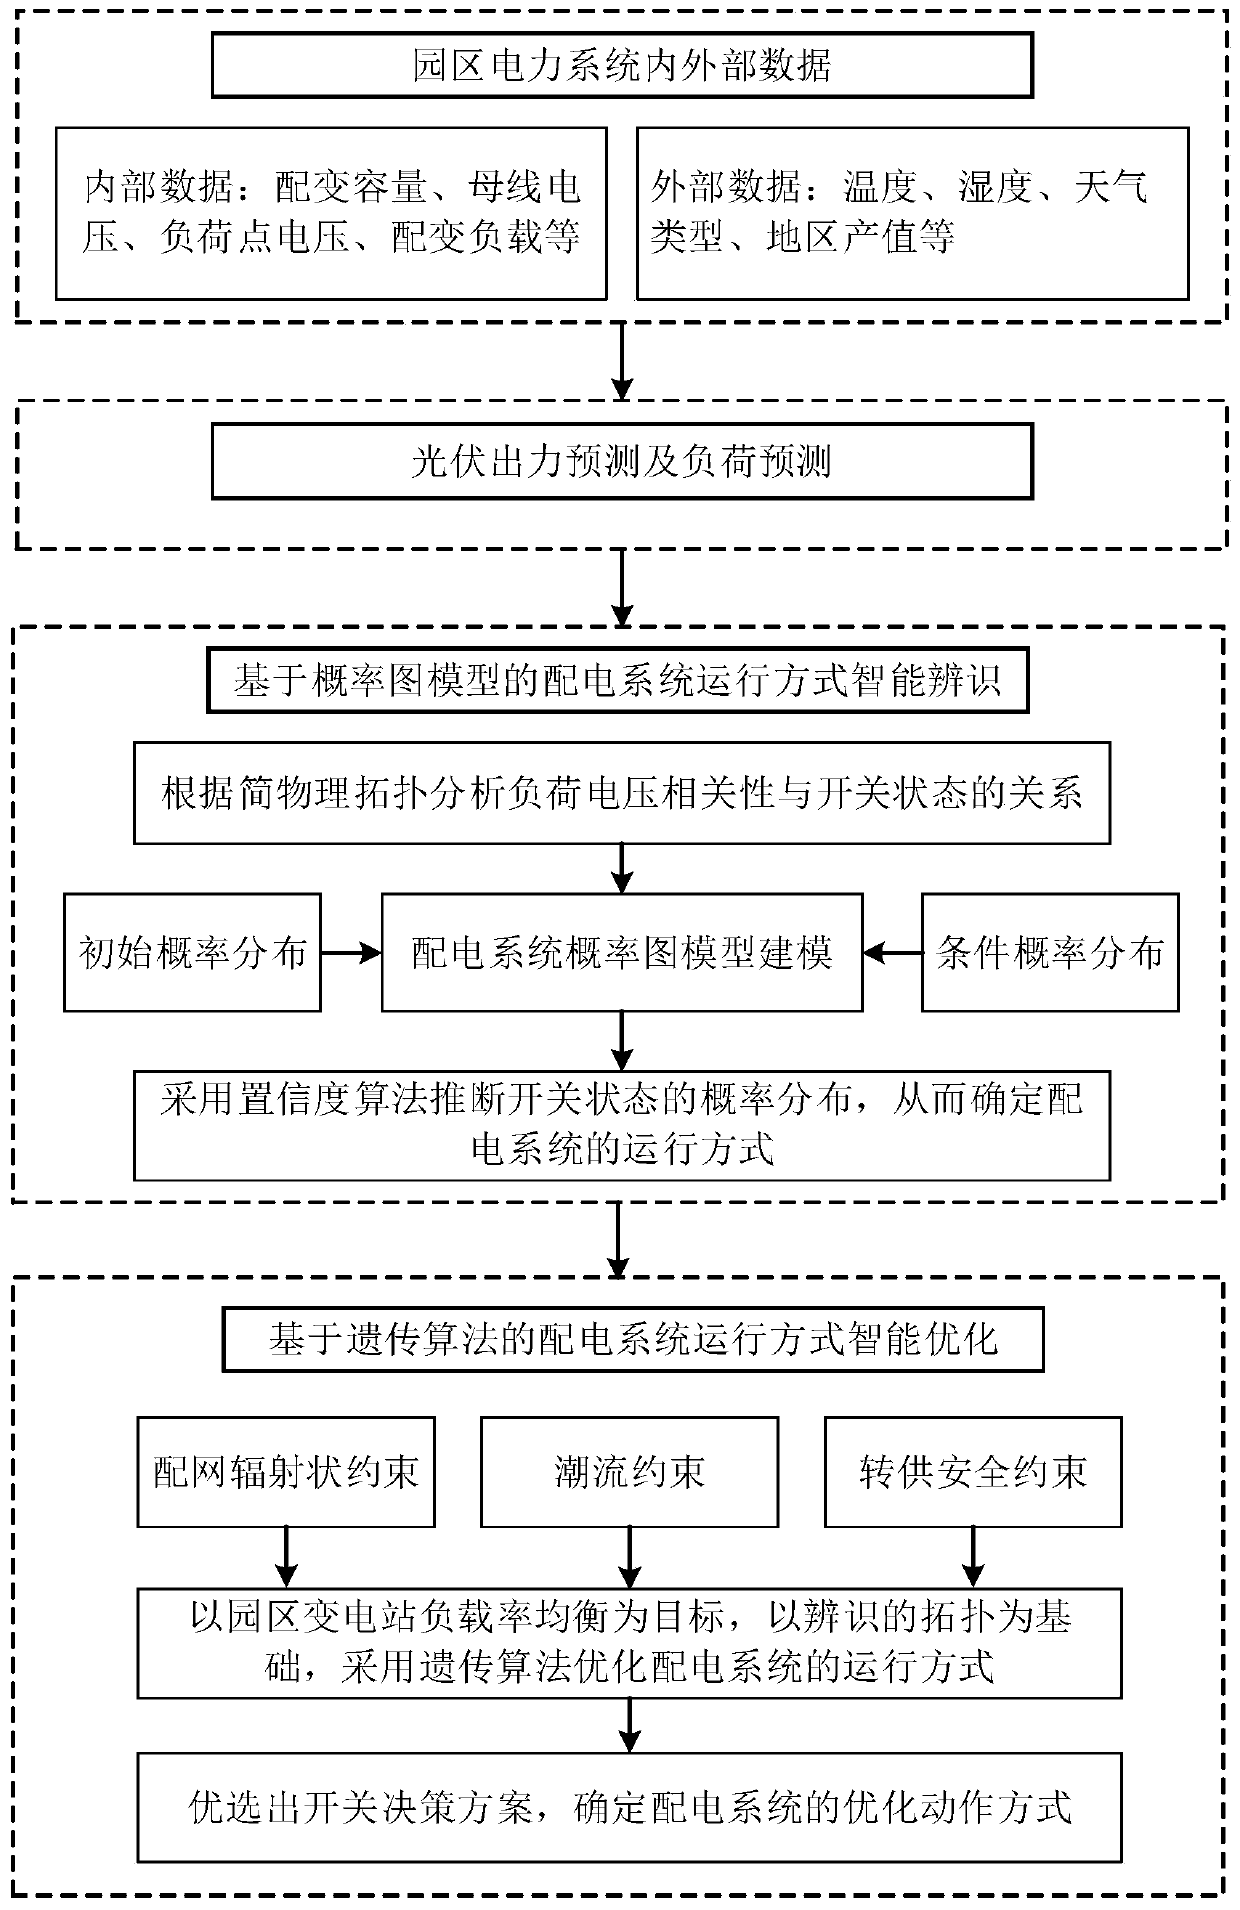 Intelligent identification and optimization method for operation mode of park power distribution system